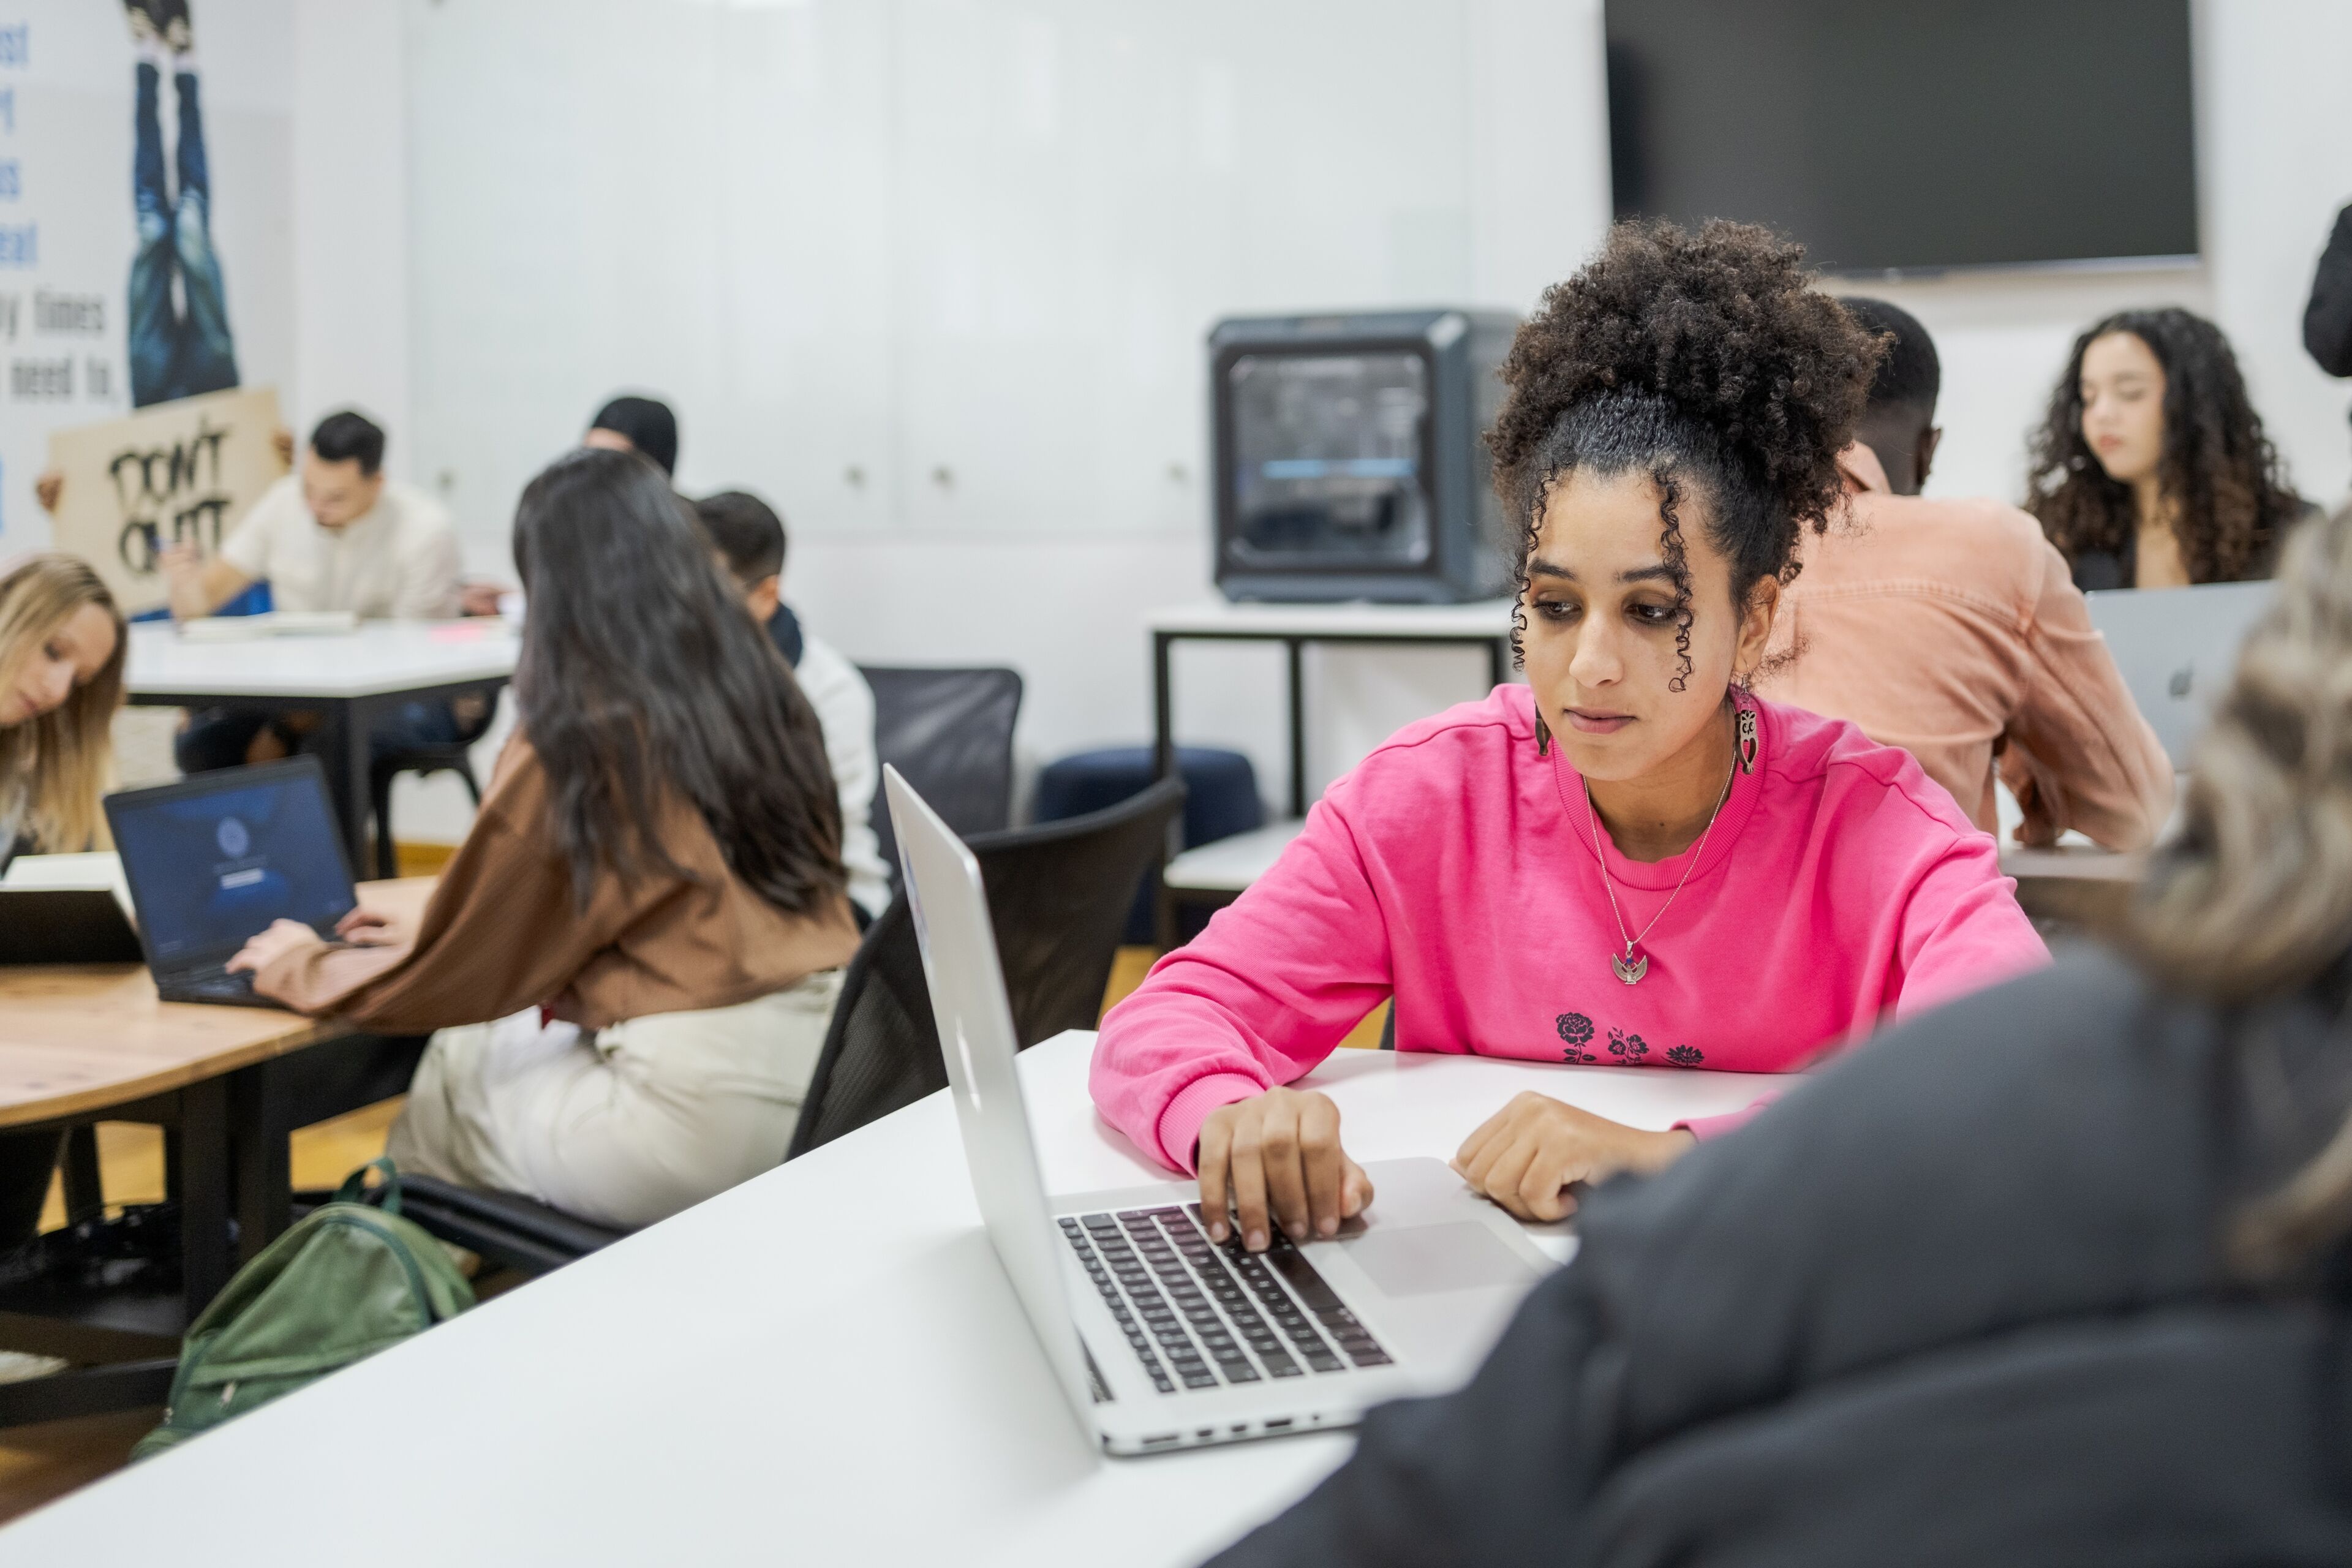 A young woman in a pink sweatshirt works on her laptop in a classroom filled with other focused students.